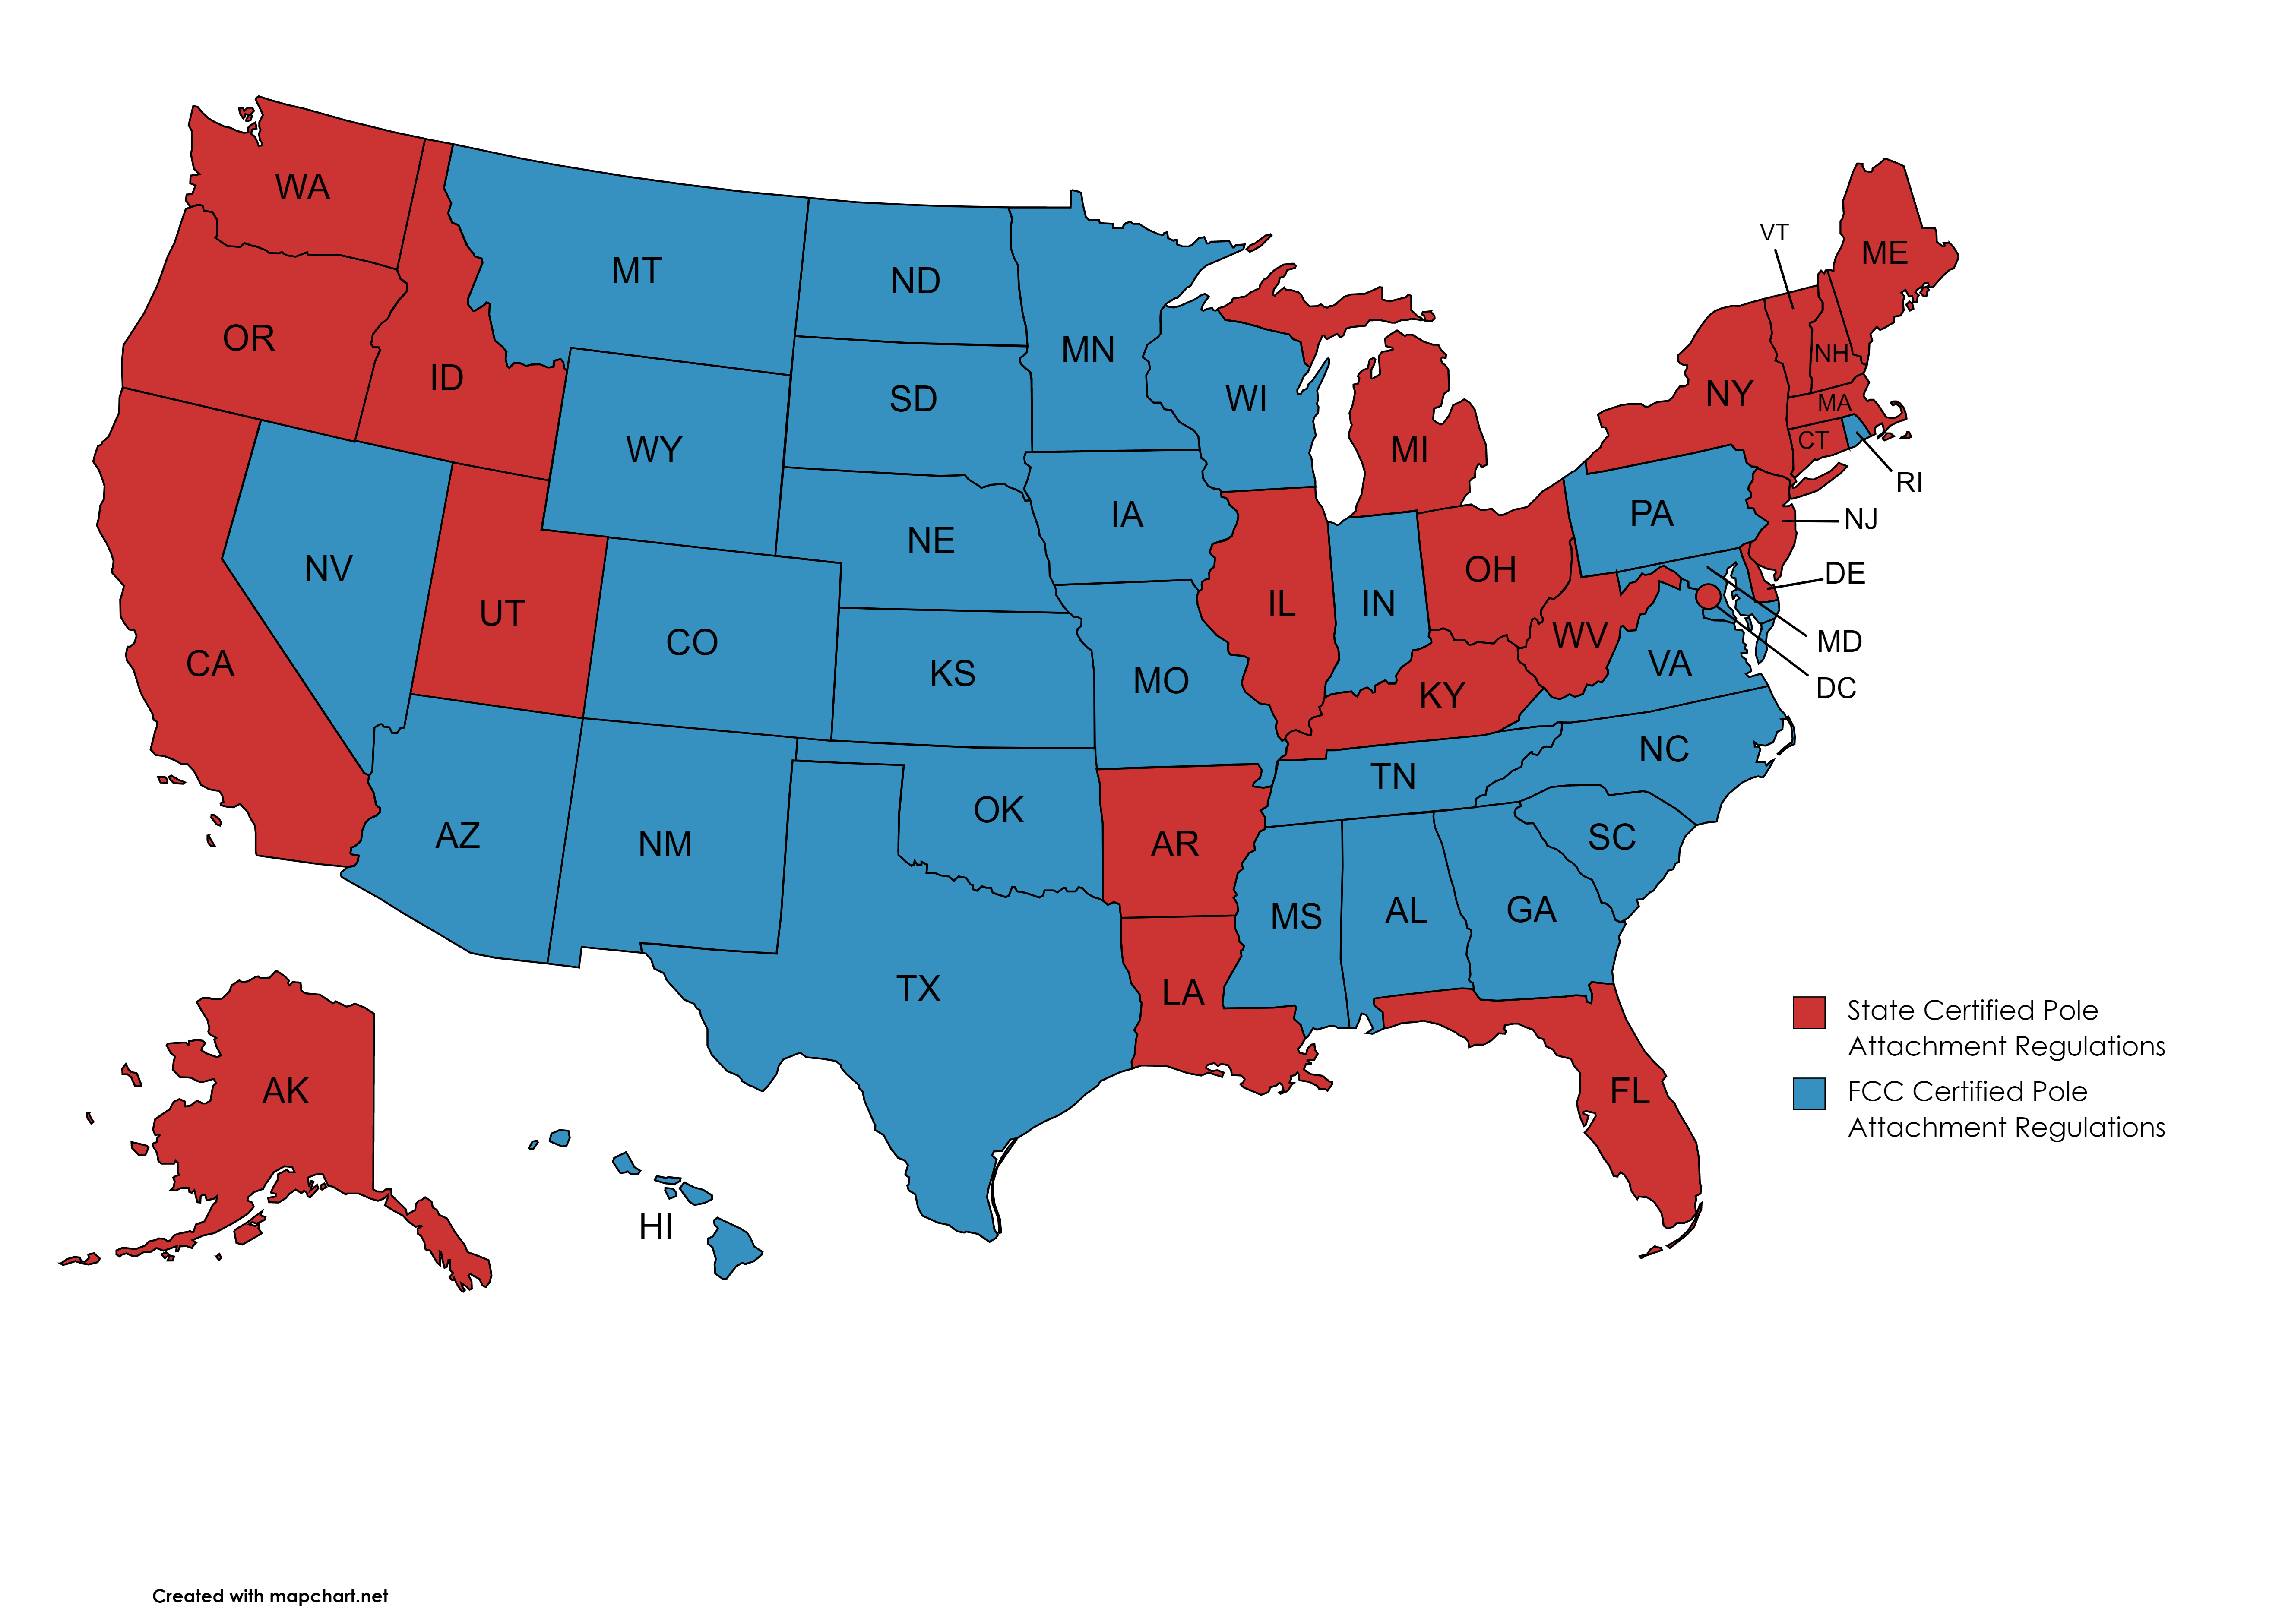 FCC Regulated States Map